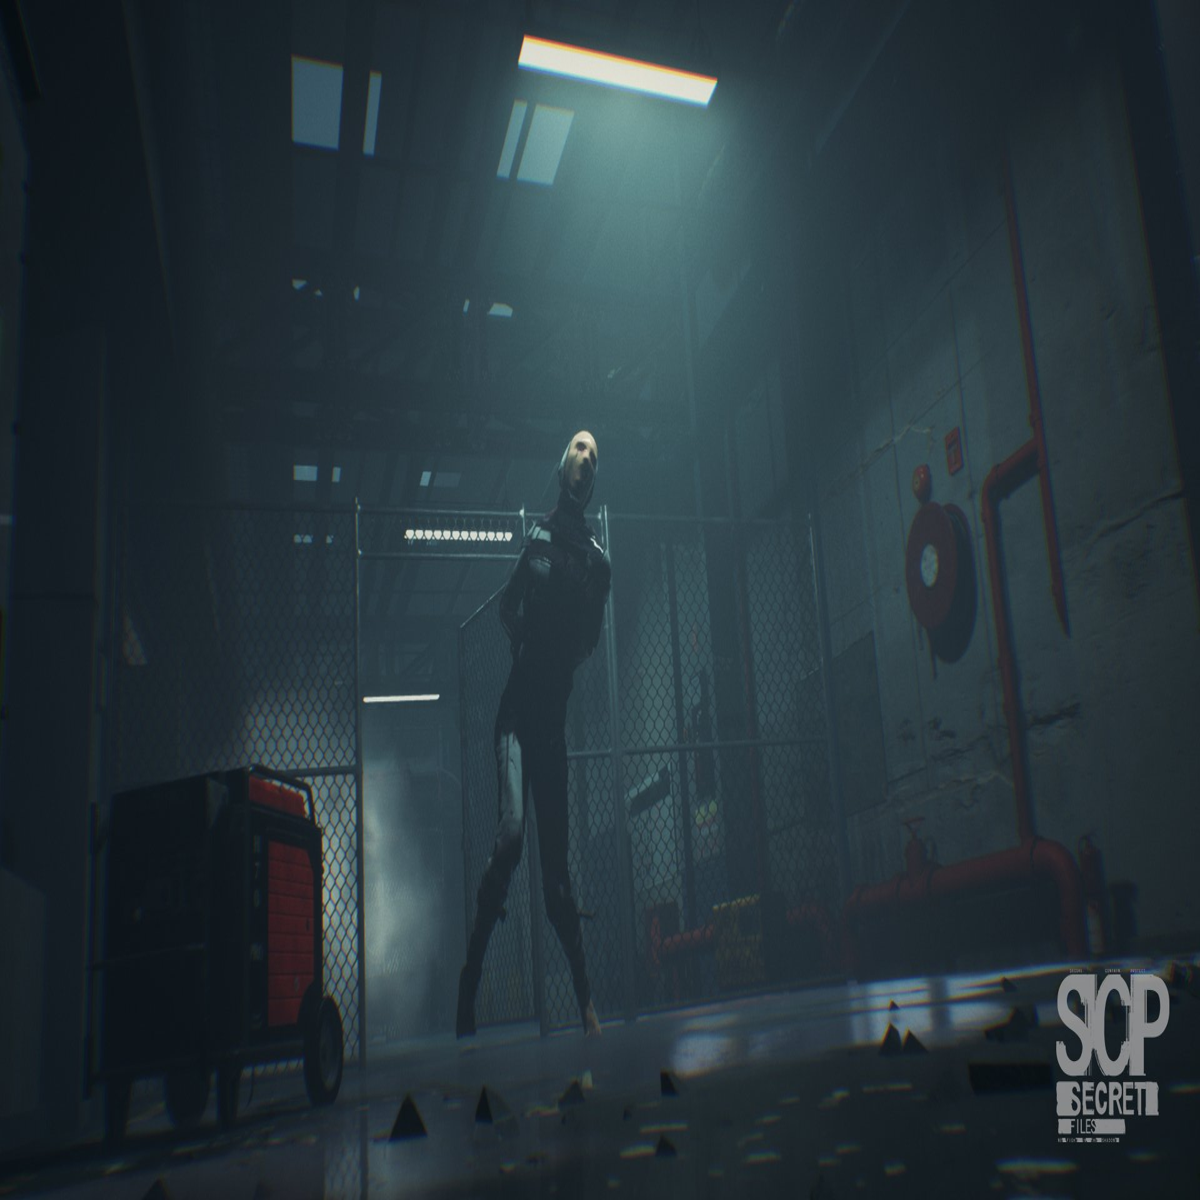 SCP: Secret Files looks like the most ambitious SCP game yet, and there's a  Steam Next Fest demo